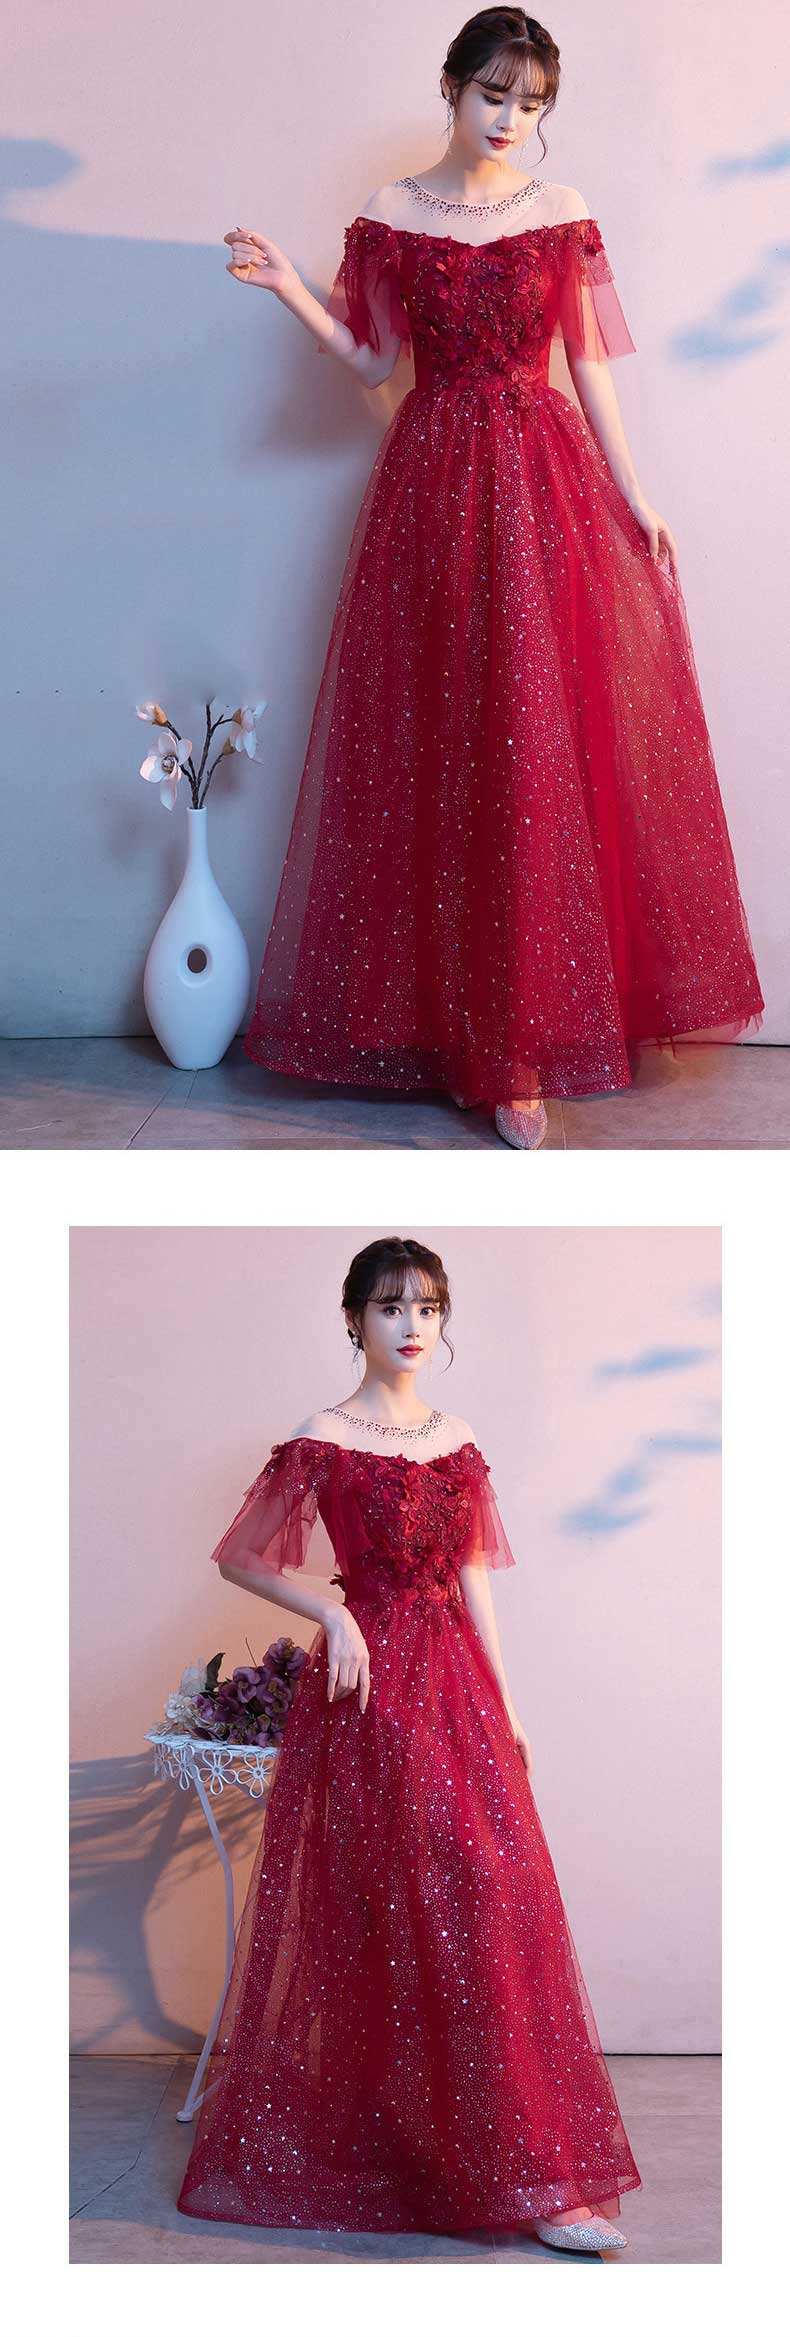 Sweet-Off-Shoulder-Chiffon-Wine-Red-Cocktail-Prom-Long-Dress10